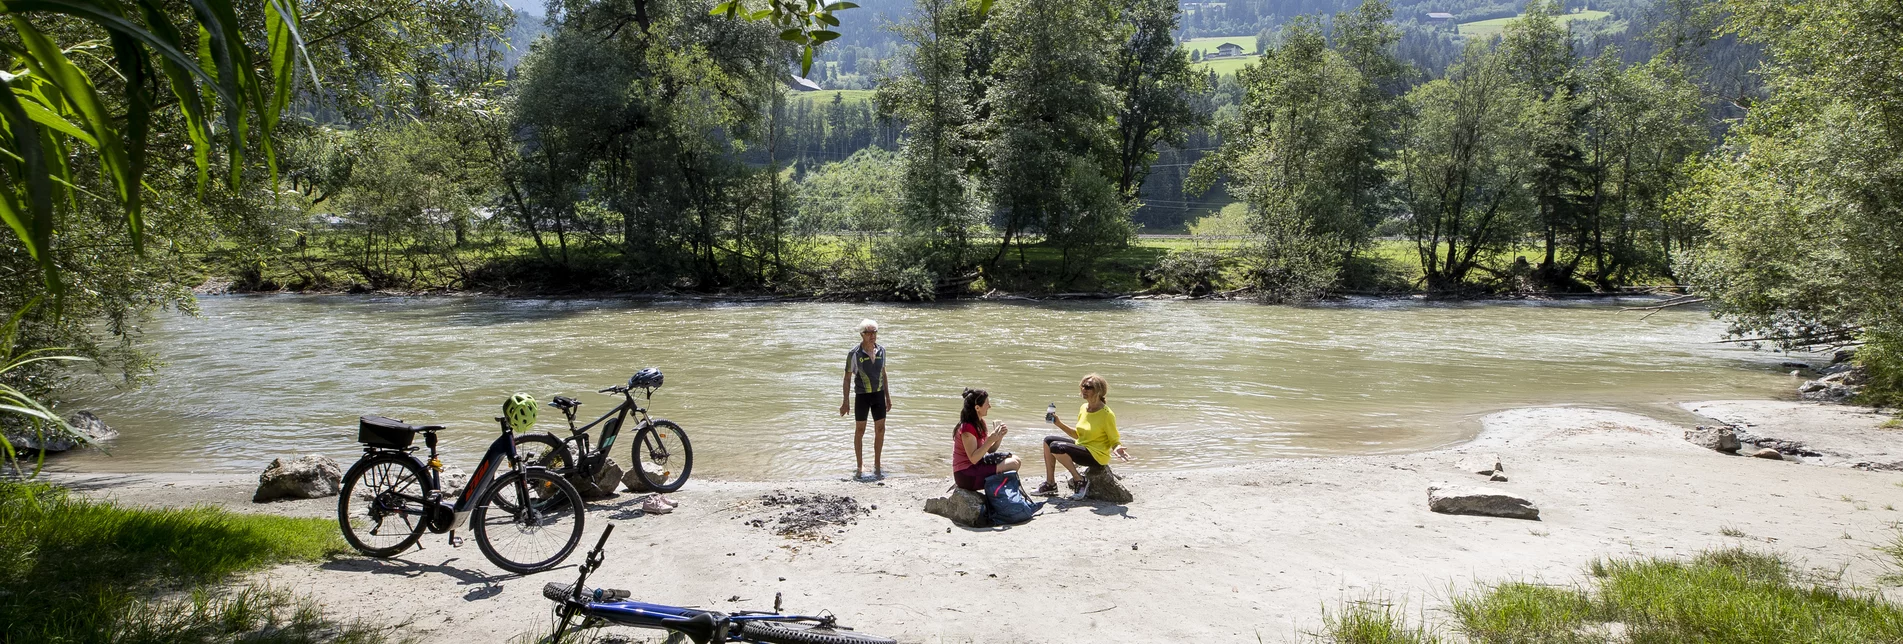 Cooling off on the Enns cycle path | © Steiermark Tourismus | Tom Lamm